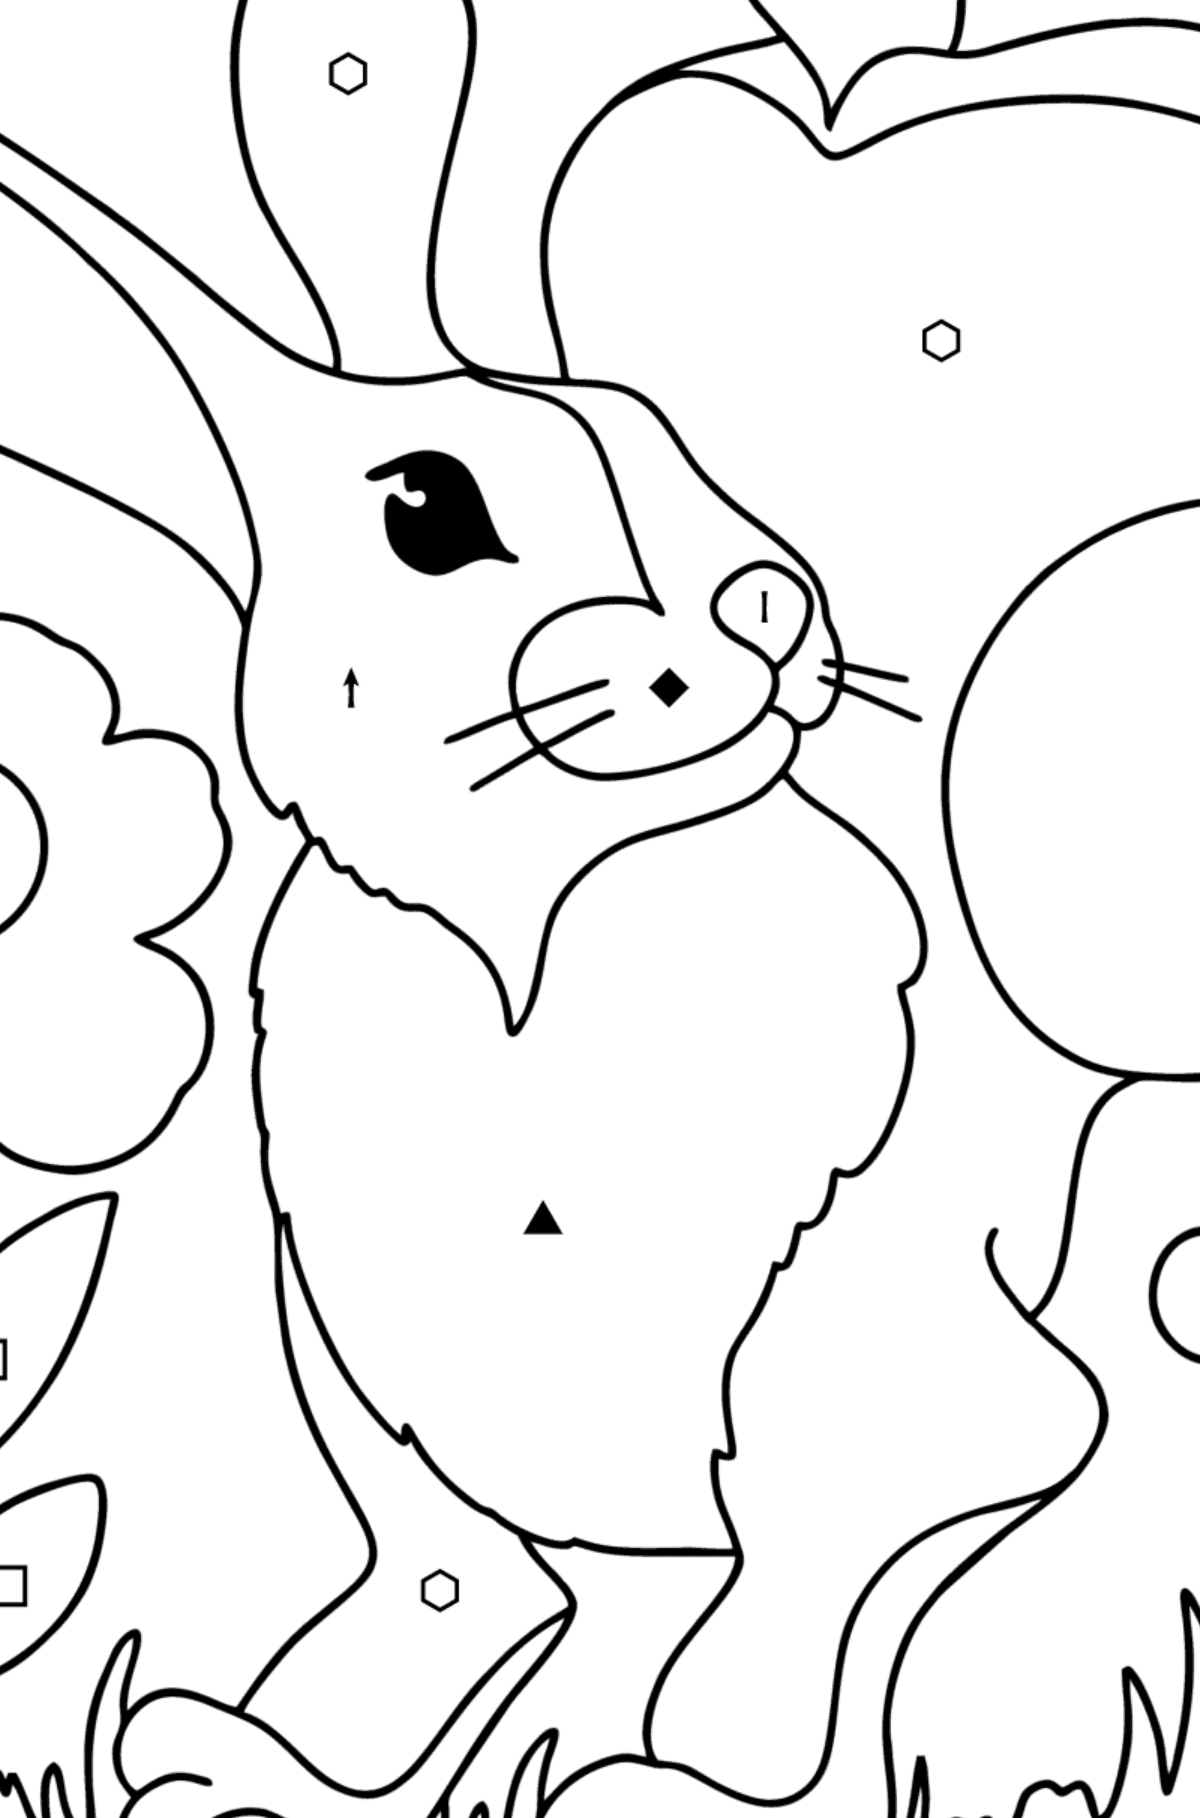 Cute Rabbit coloring page - Coloring by Symbols and Geometric Shapes for Kids